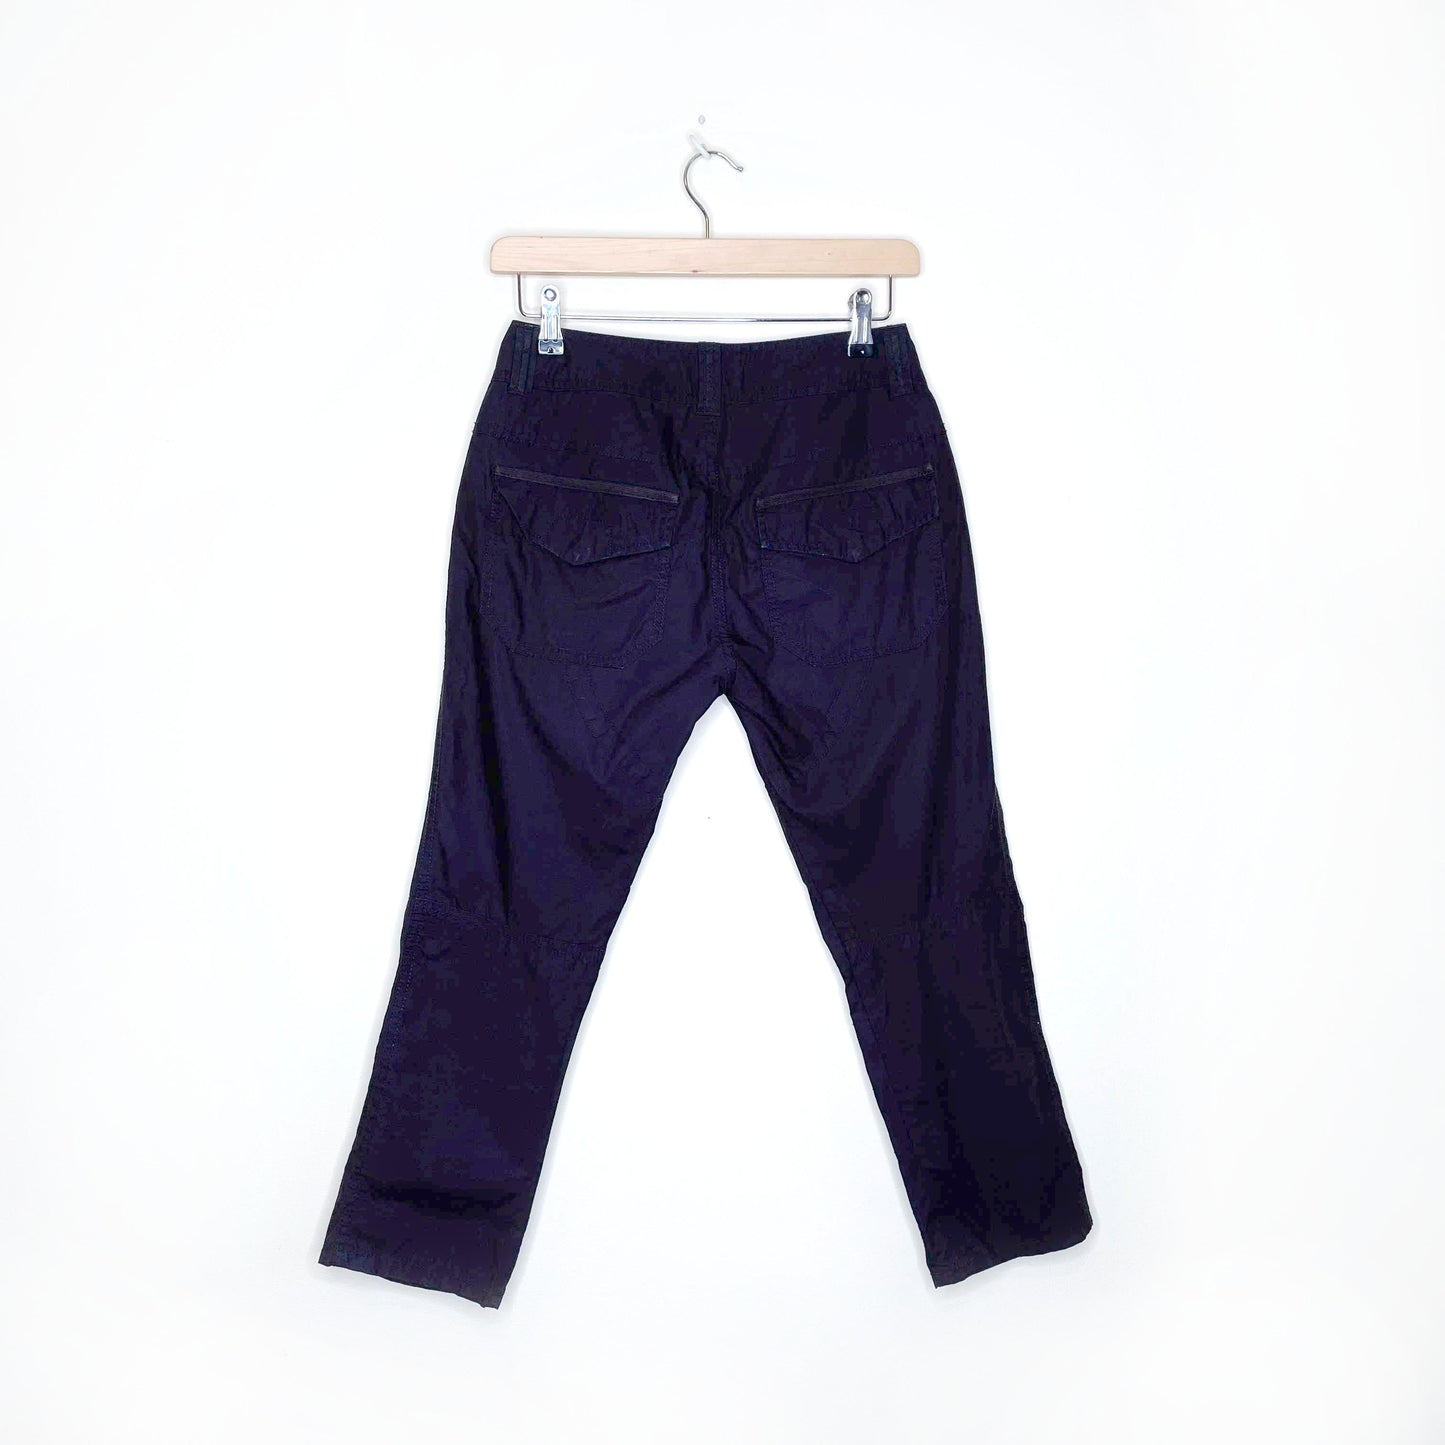 diesel navy blue cropped utility pants - size 24